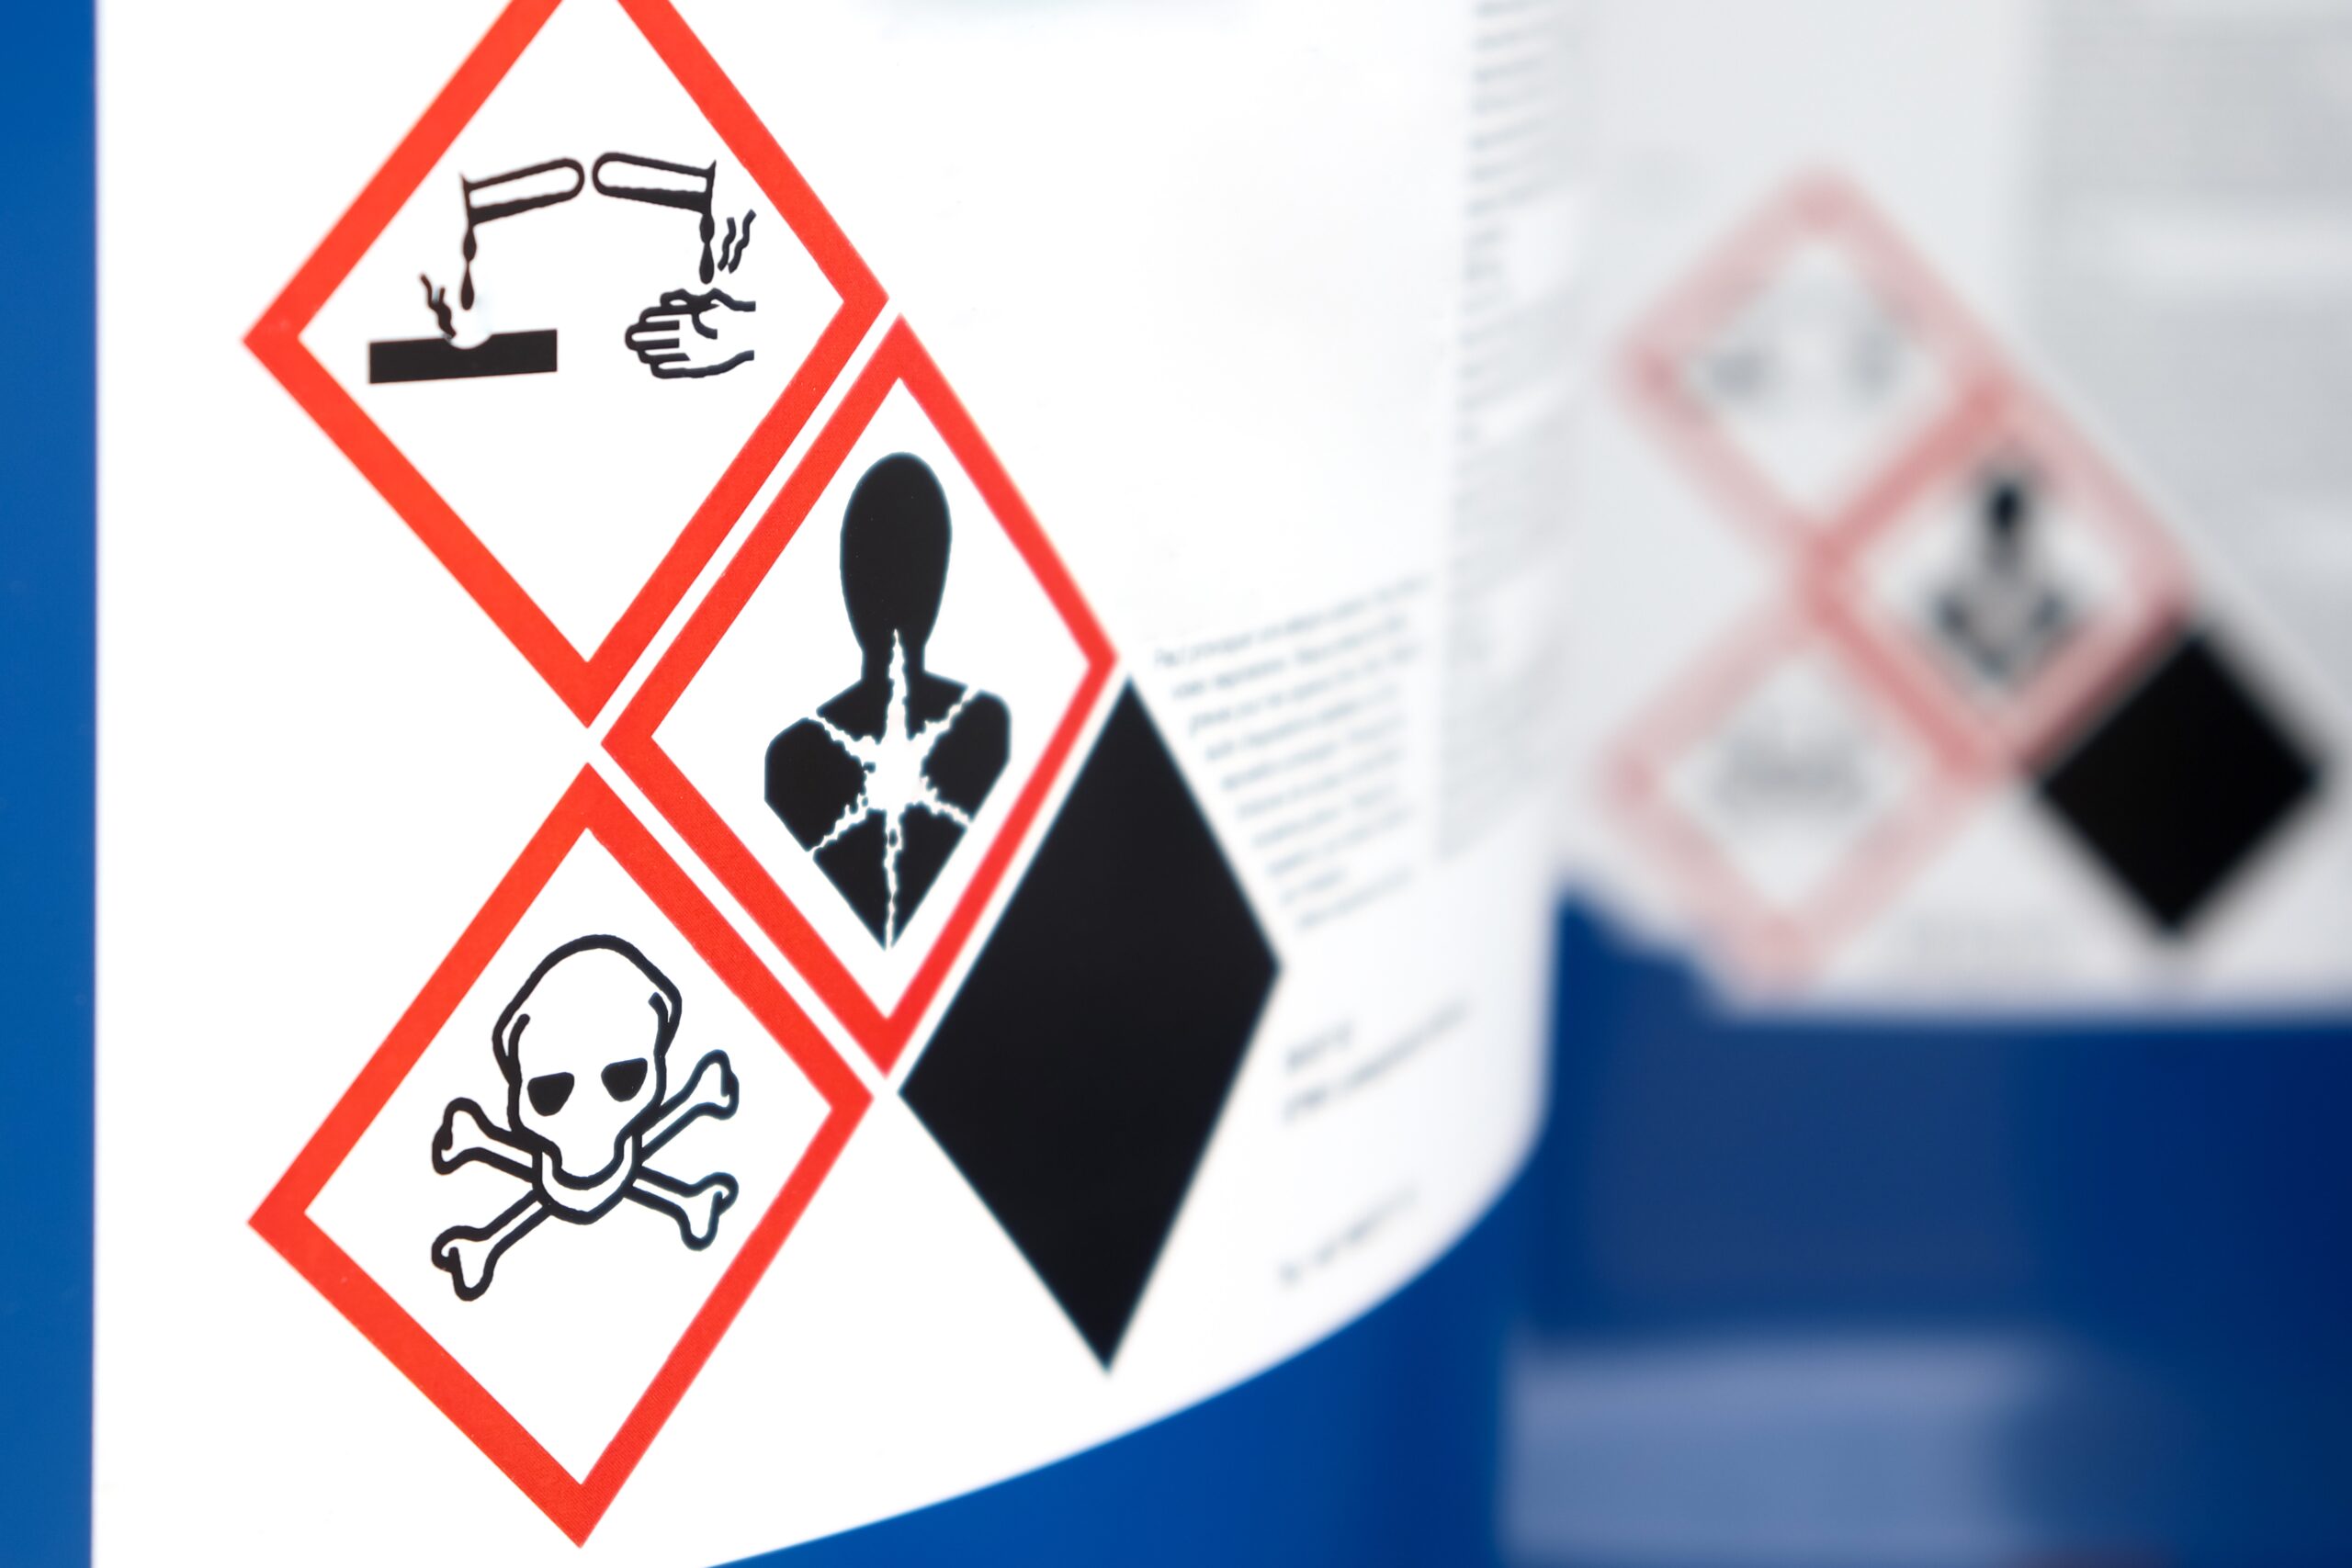 Symbol on the chemical Hazard and Risk